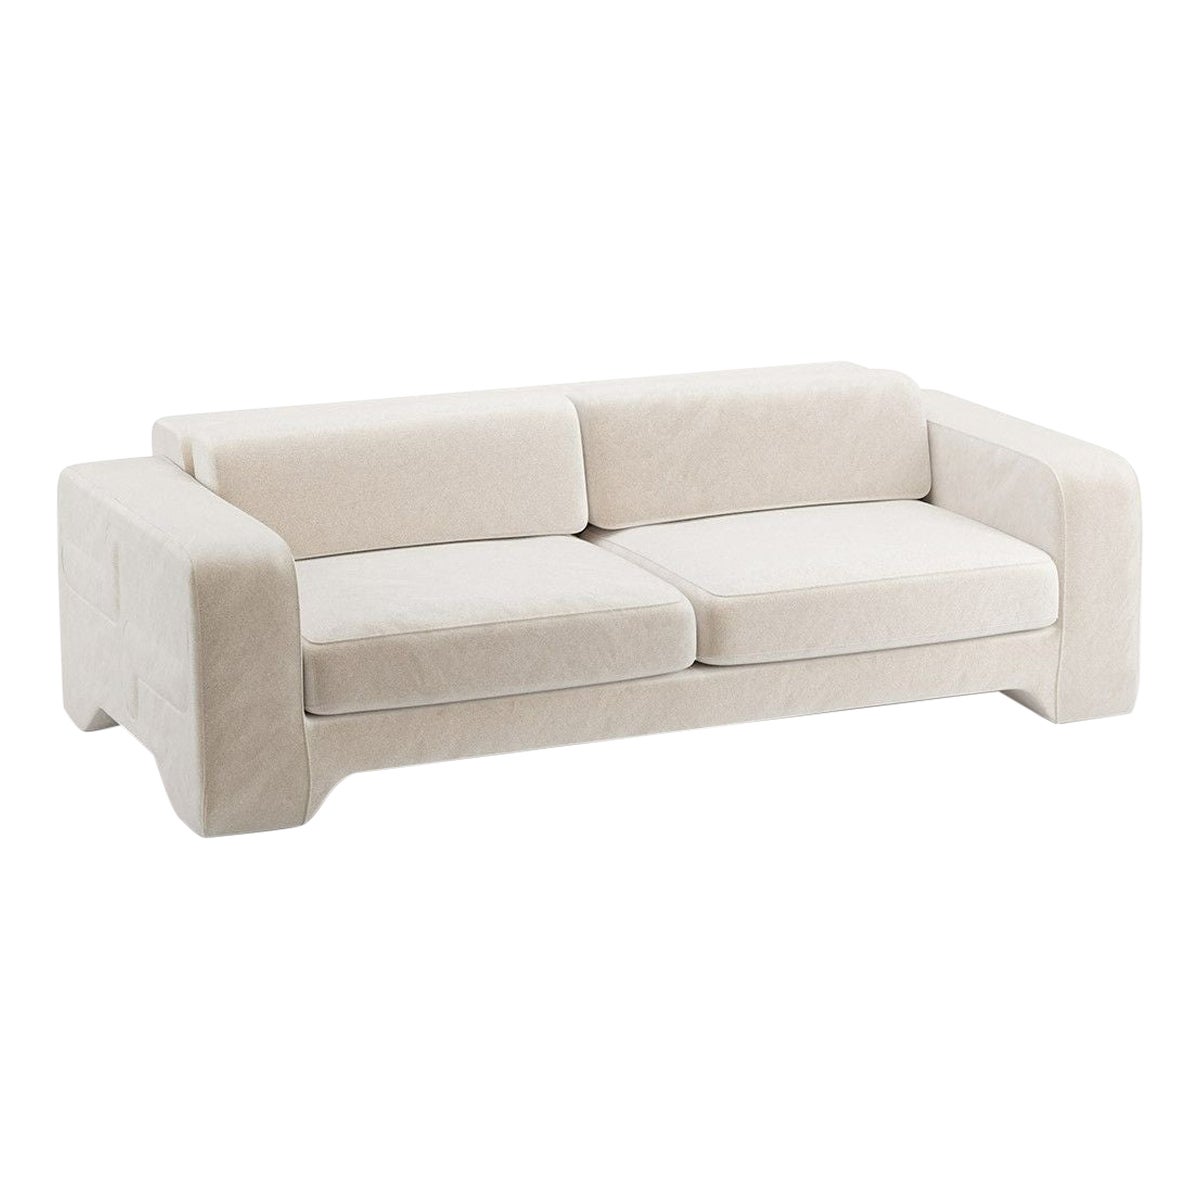 Popus Editions Giovanna 4 Seater Sofa in Egg Shell Off-White Como Velvet Fabric For Sale